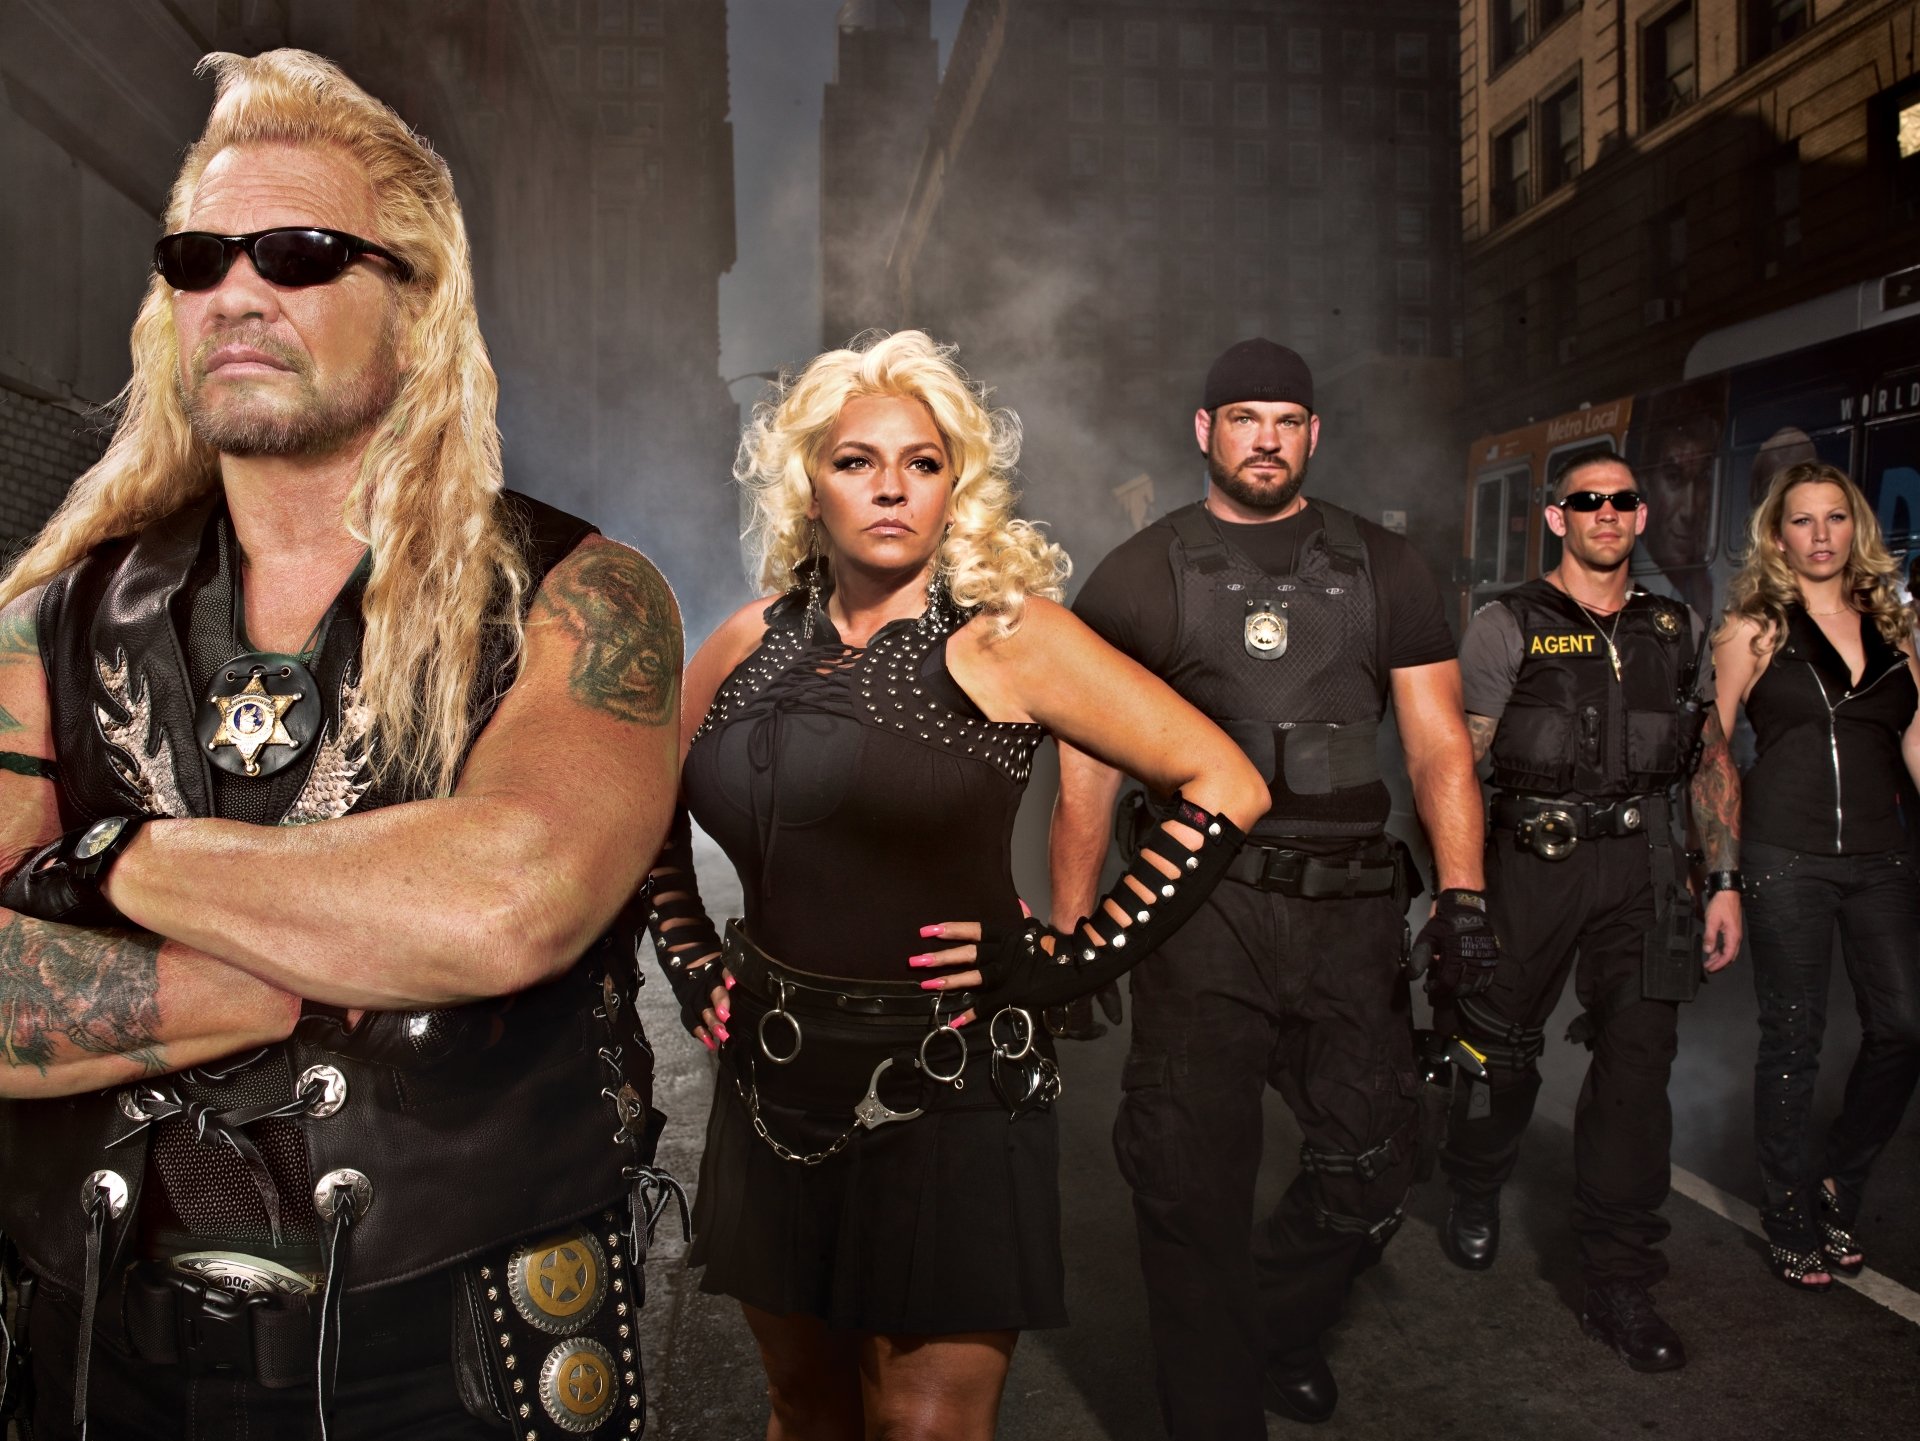 Dog The Bounty Hunter Wallpapers